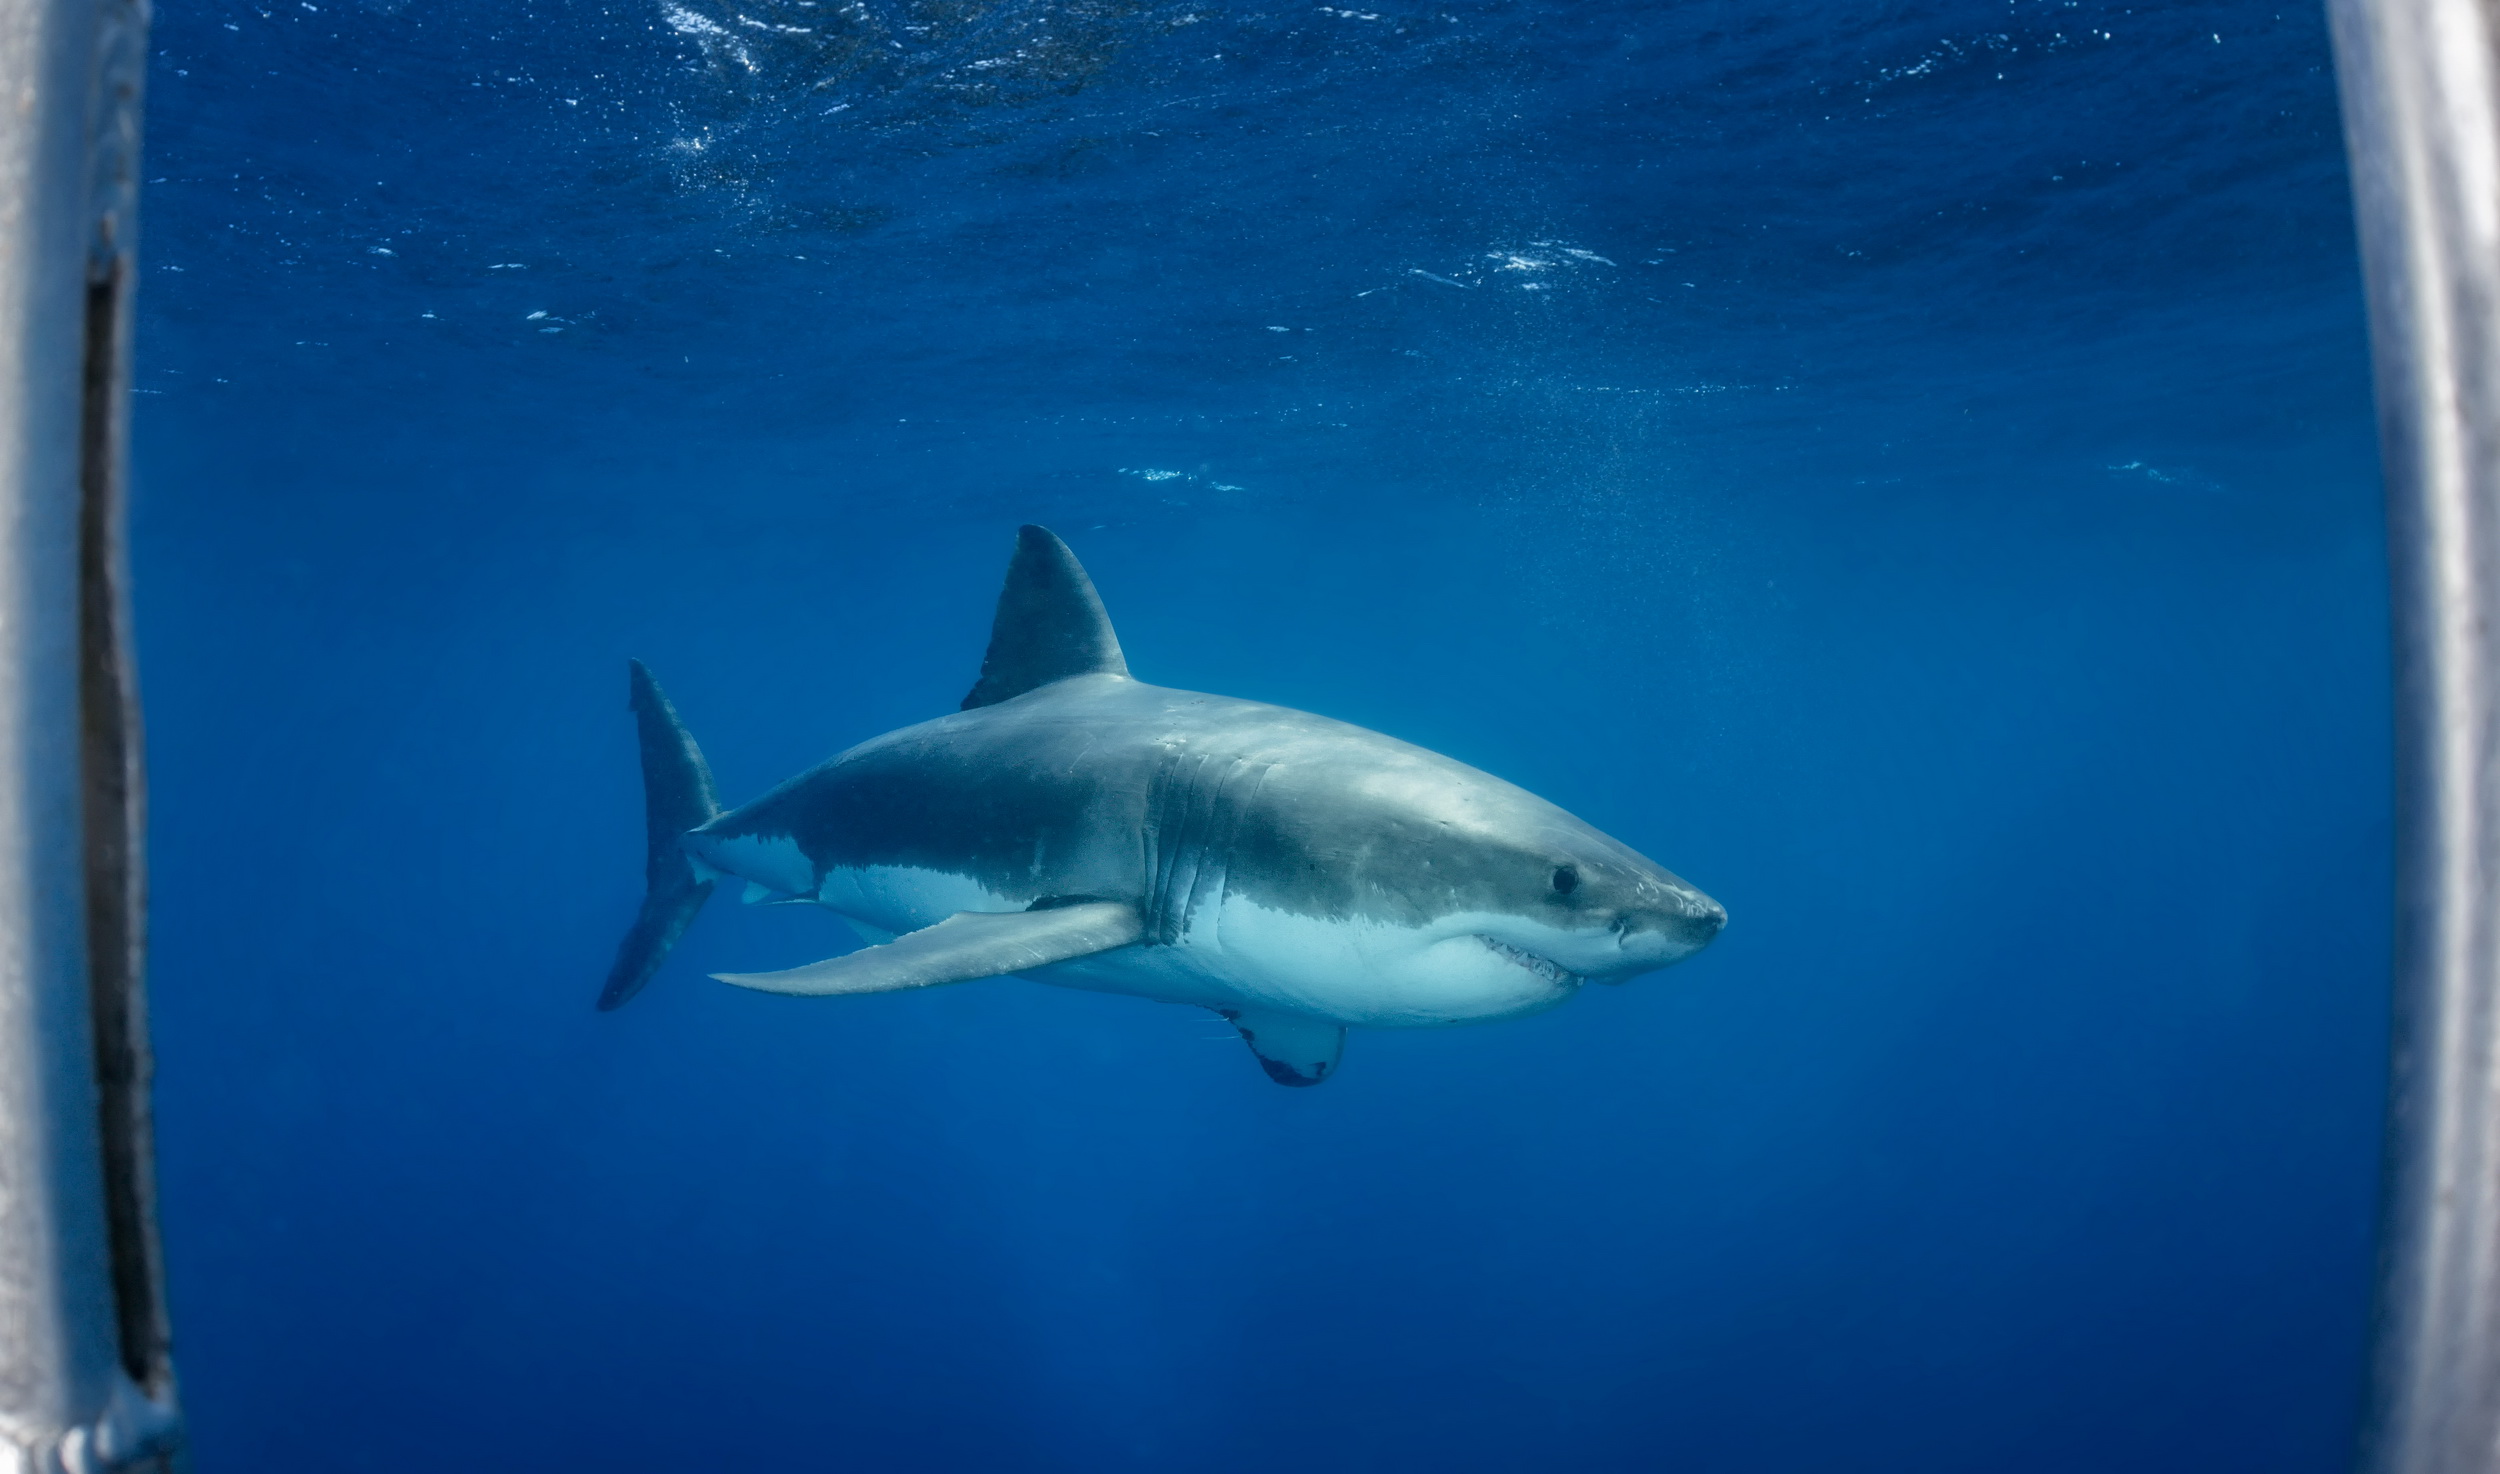 Great white shark patrols near the cage